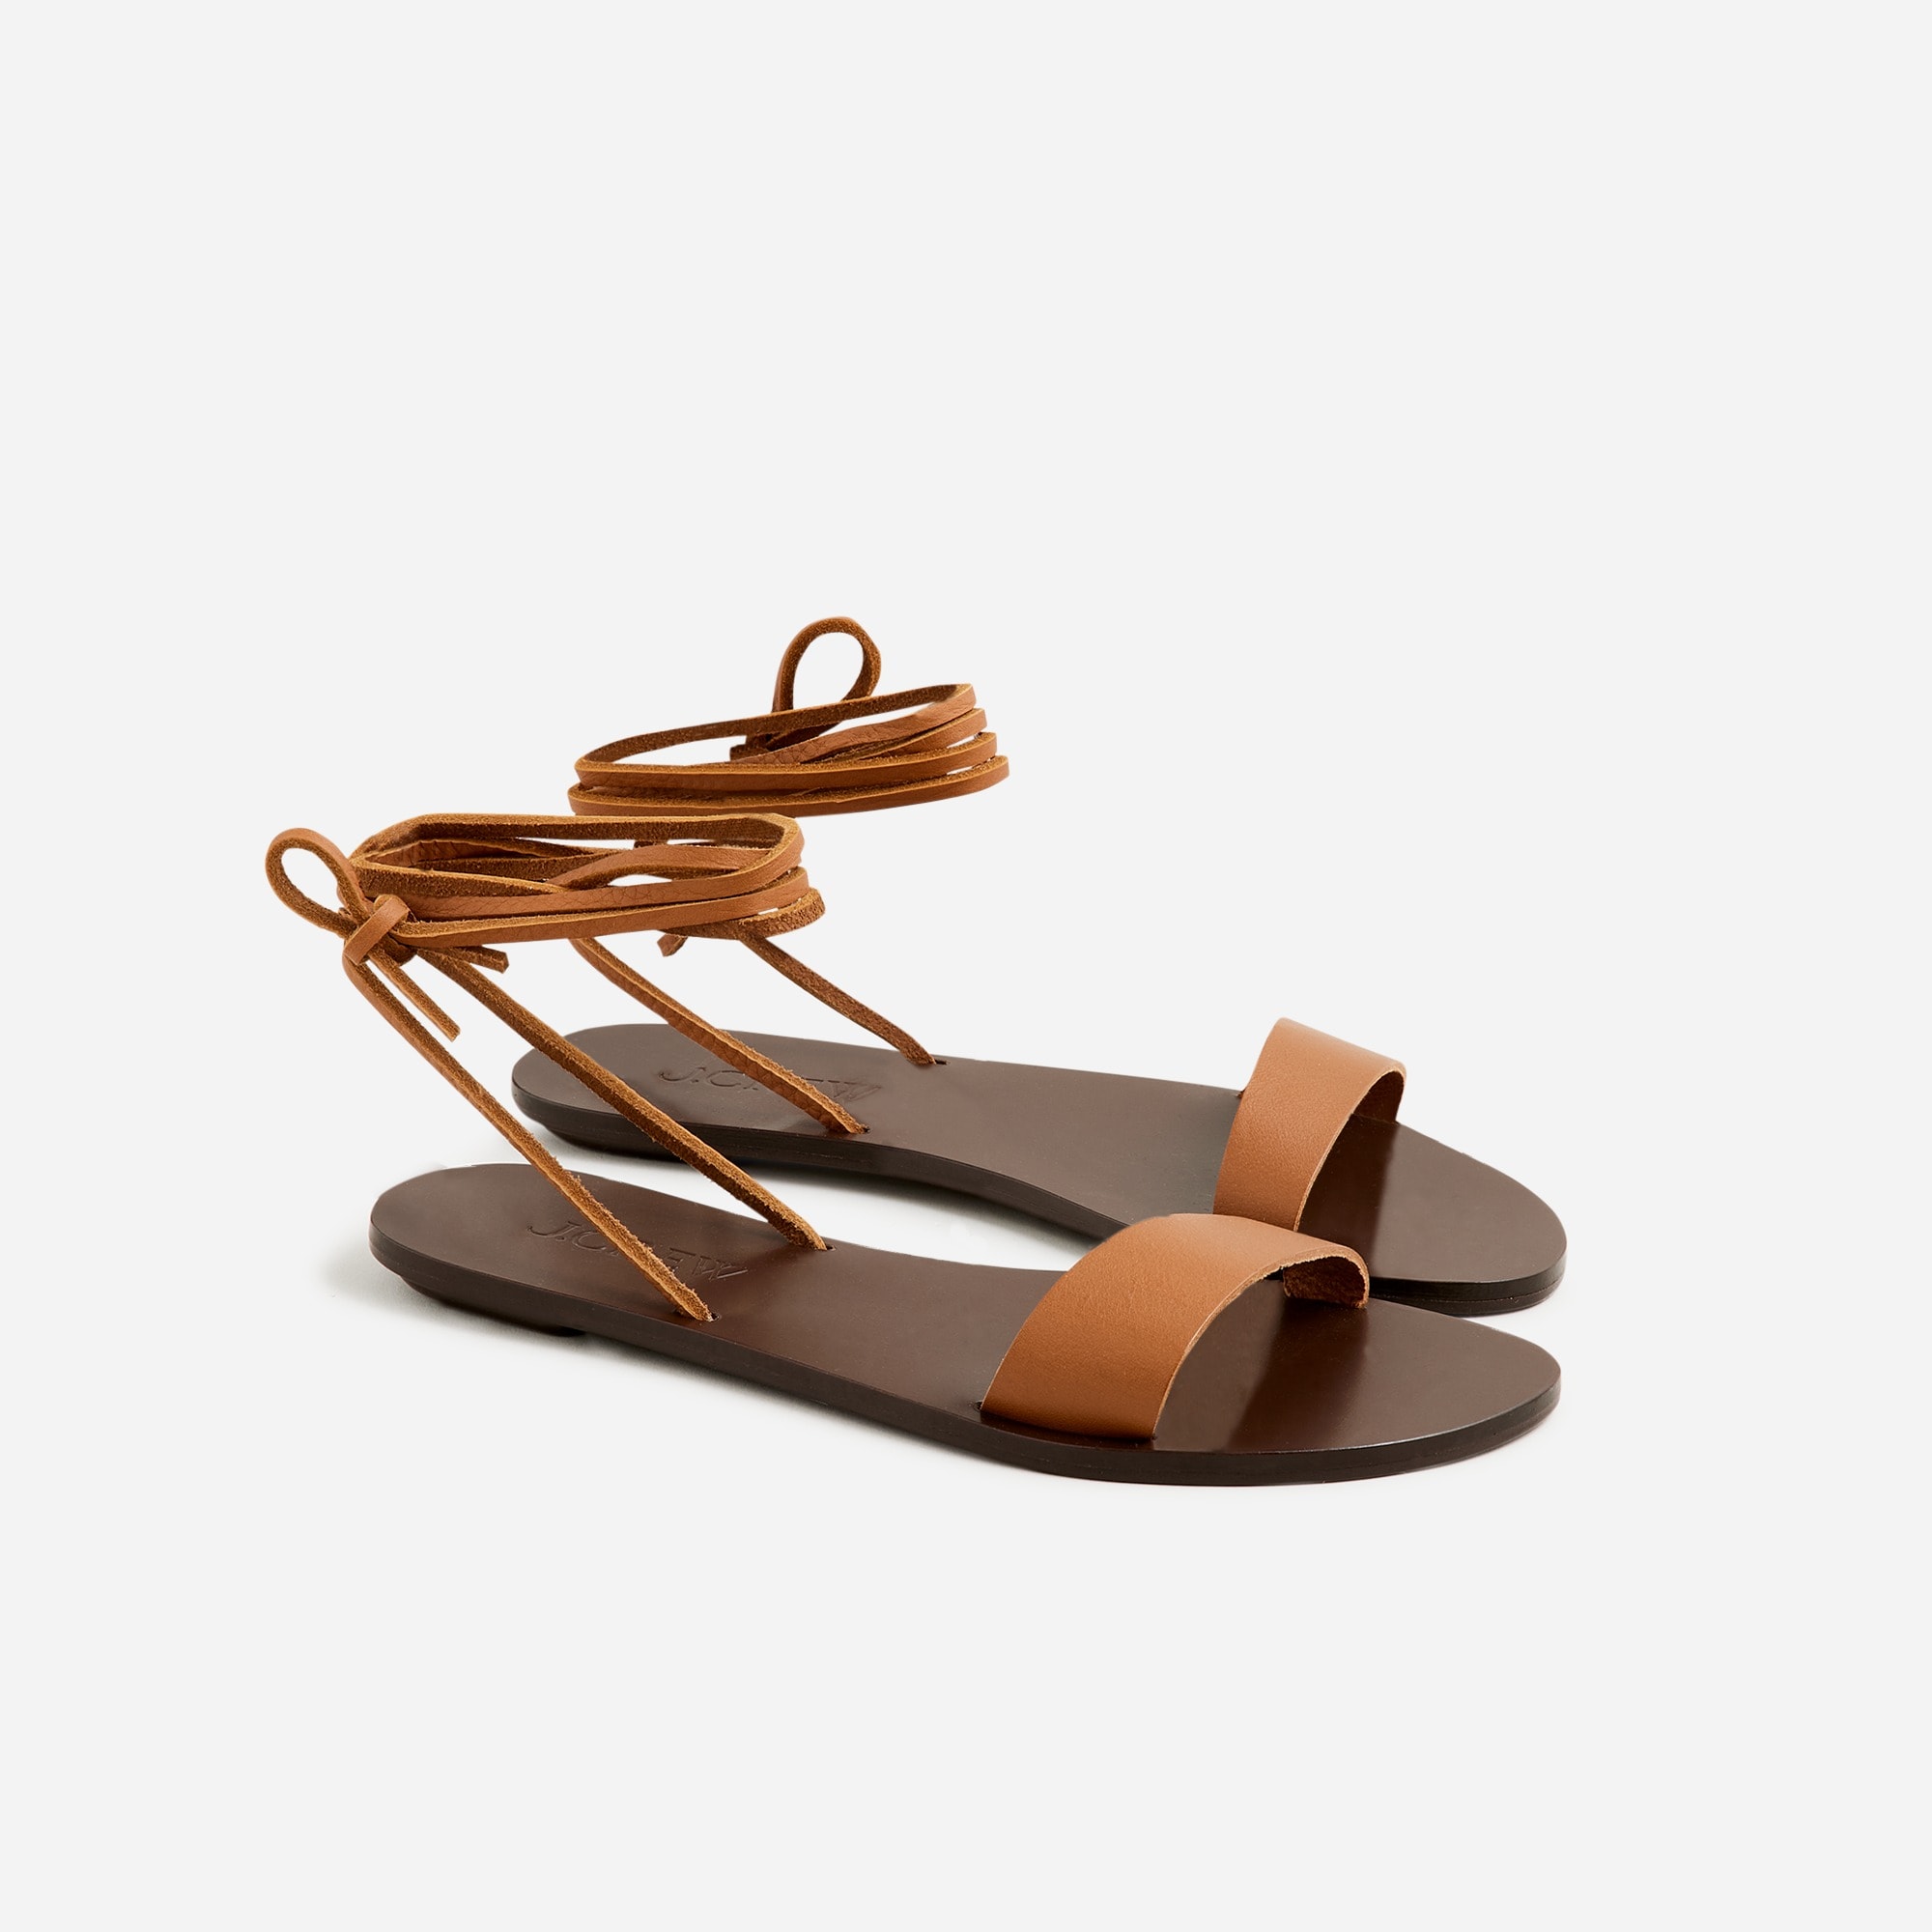  Carsen made-in-Italy lace-up sandals in leather